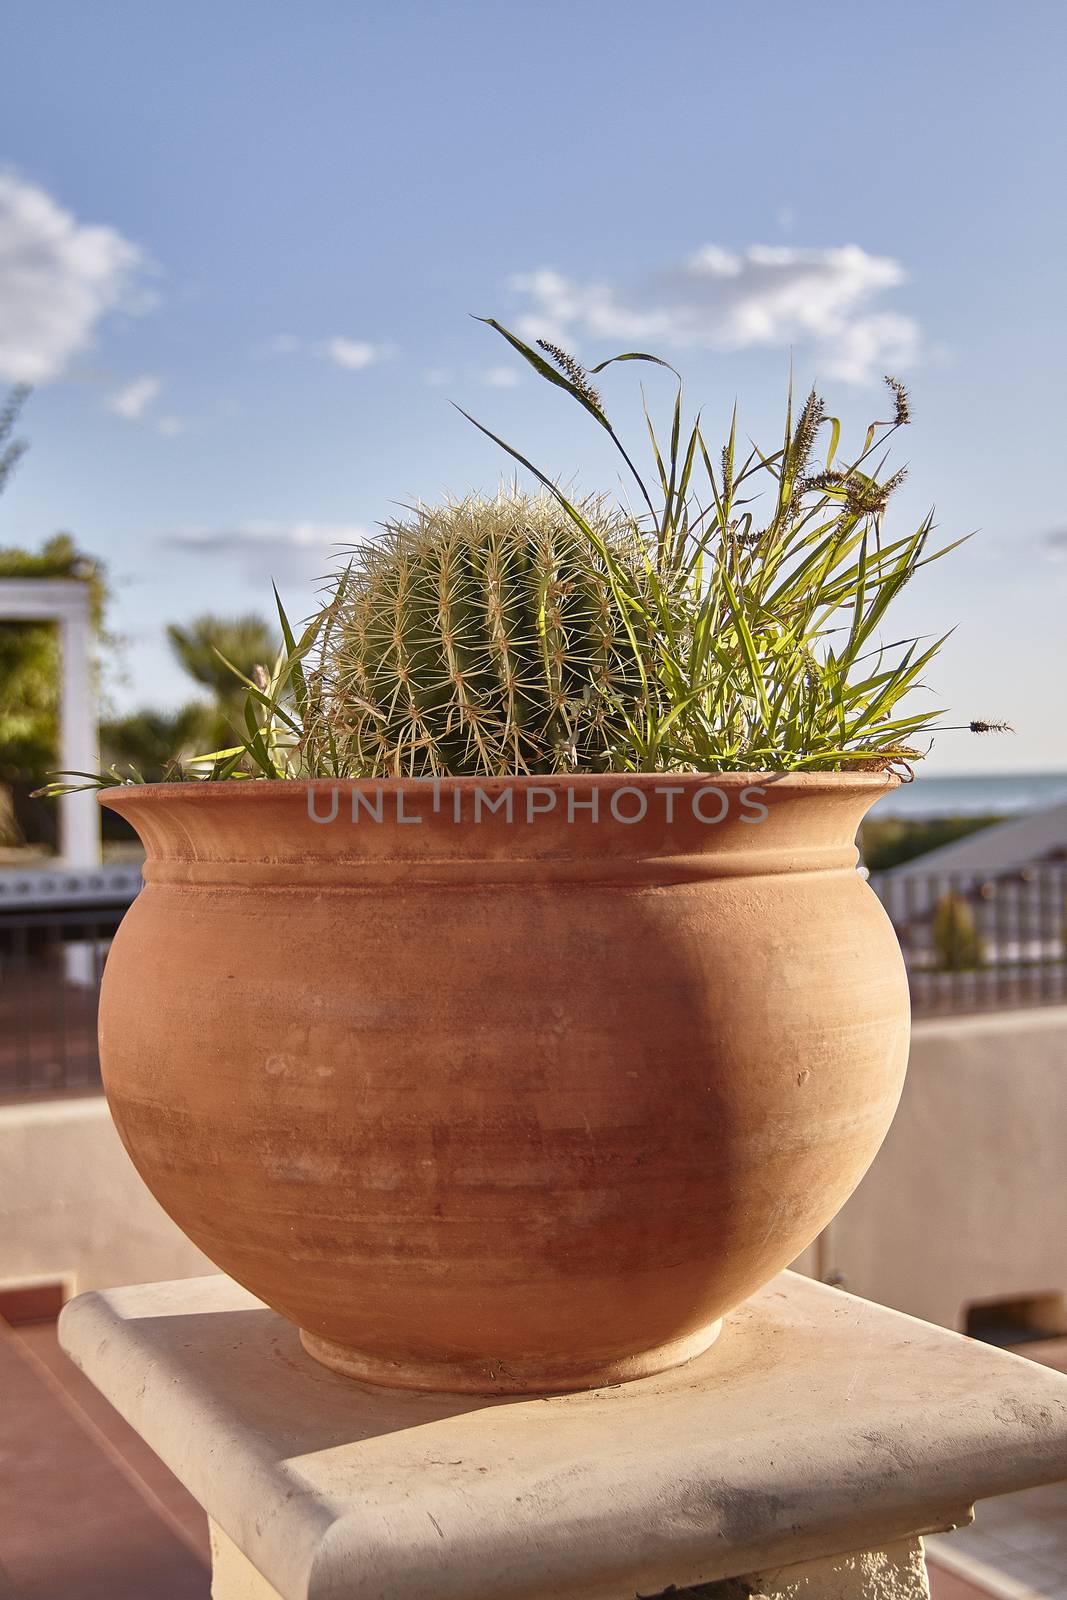 Cactus in pot used as an ornamental plant in a garden